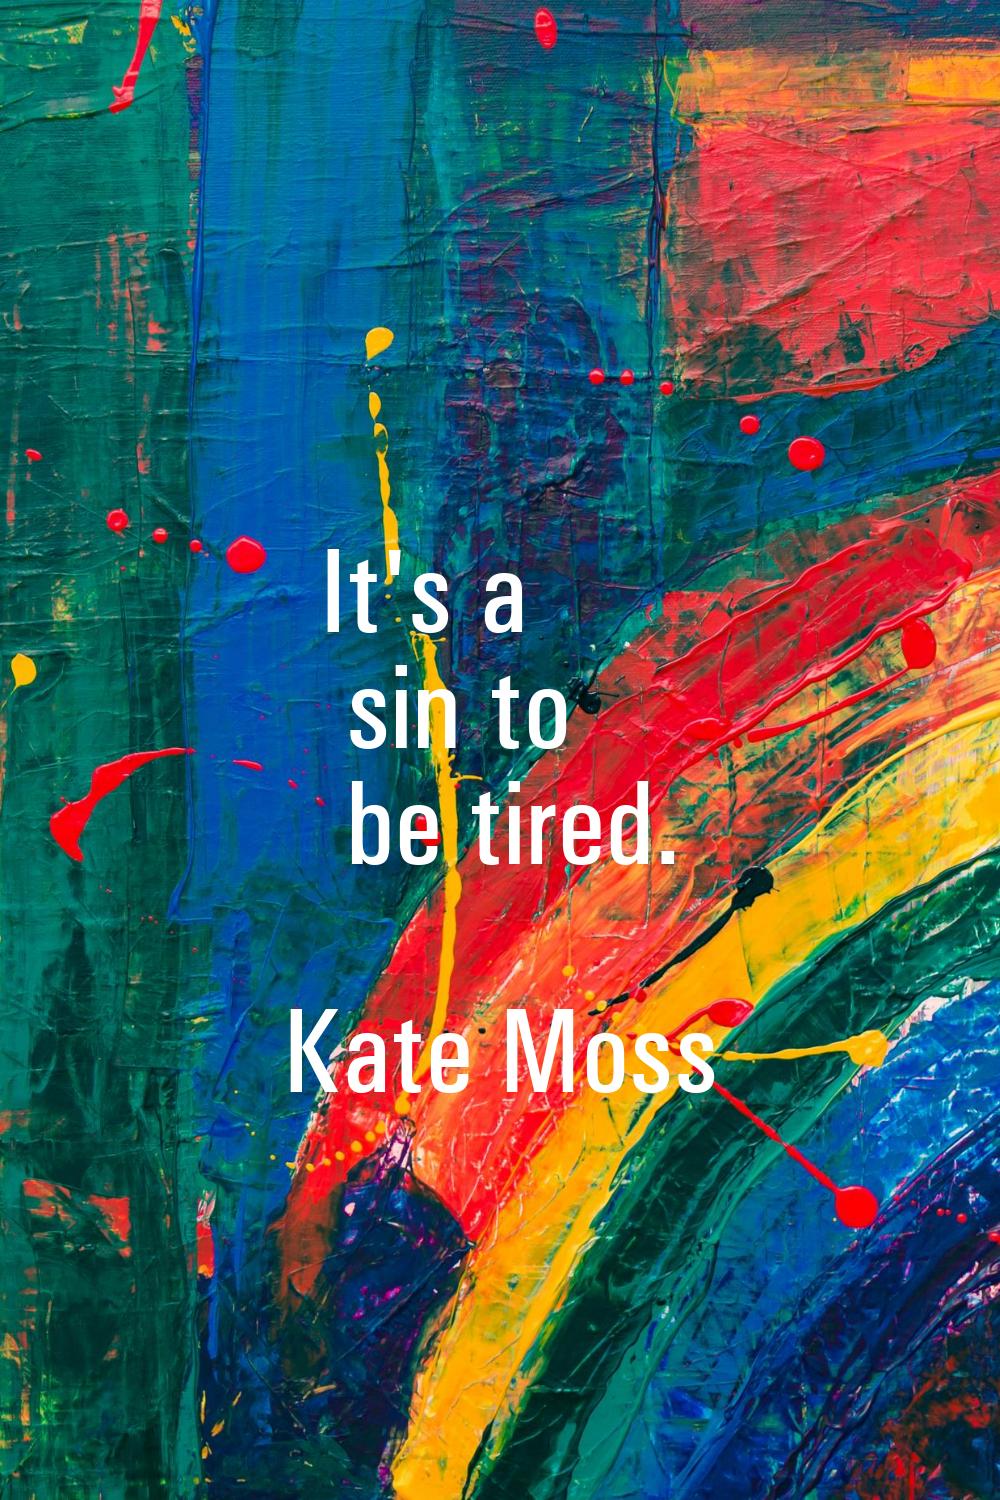 It's a sin to be tired.